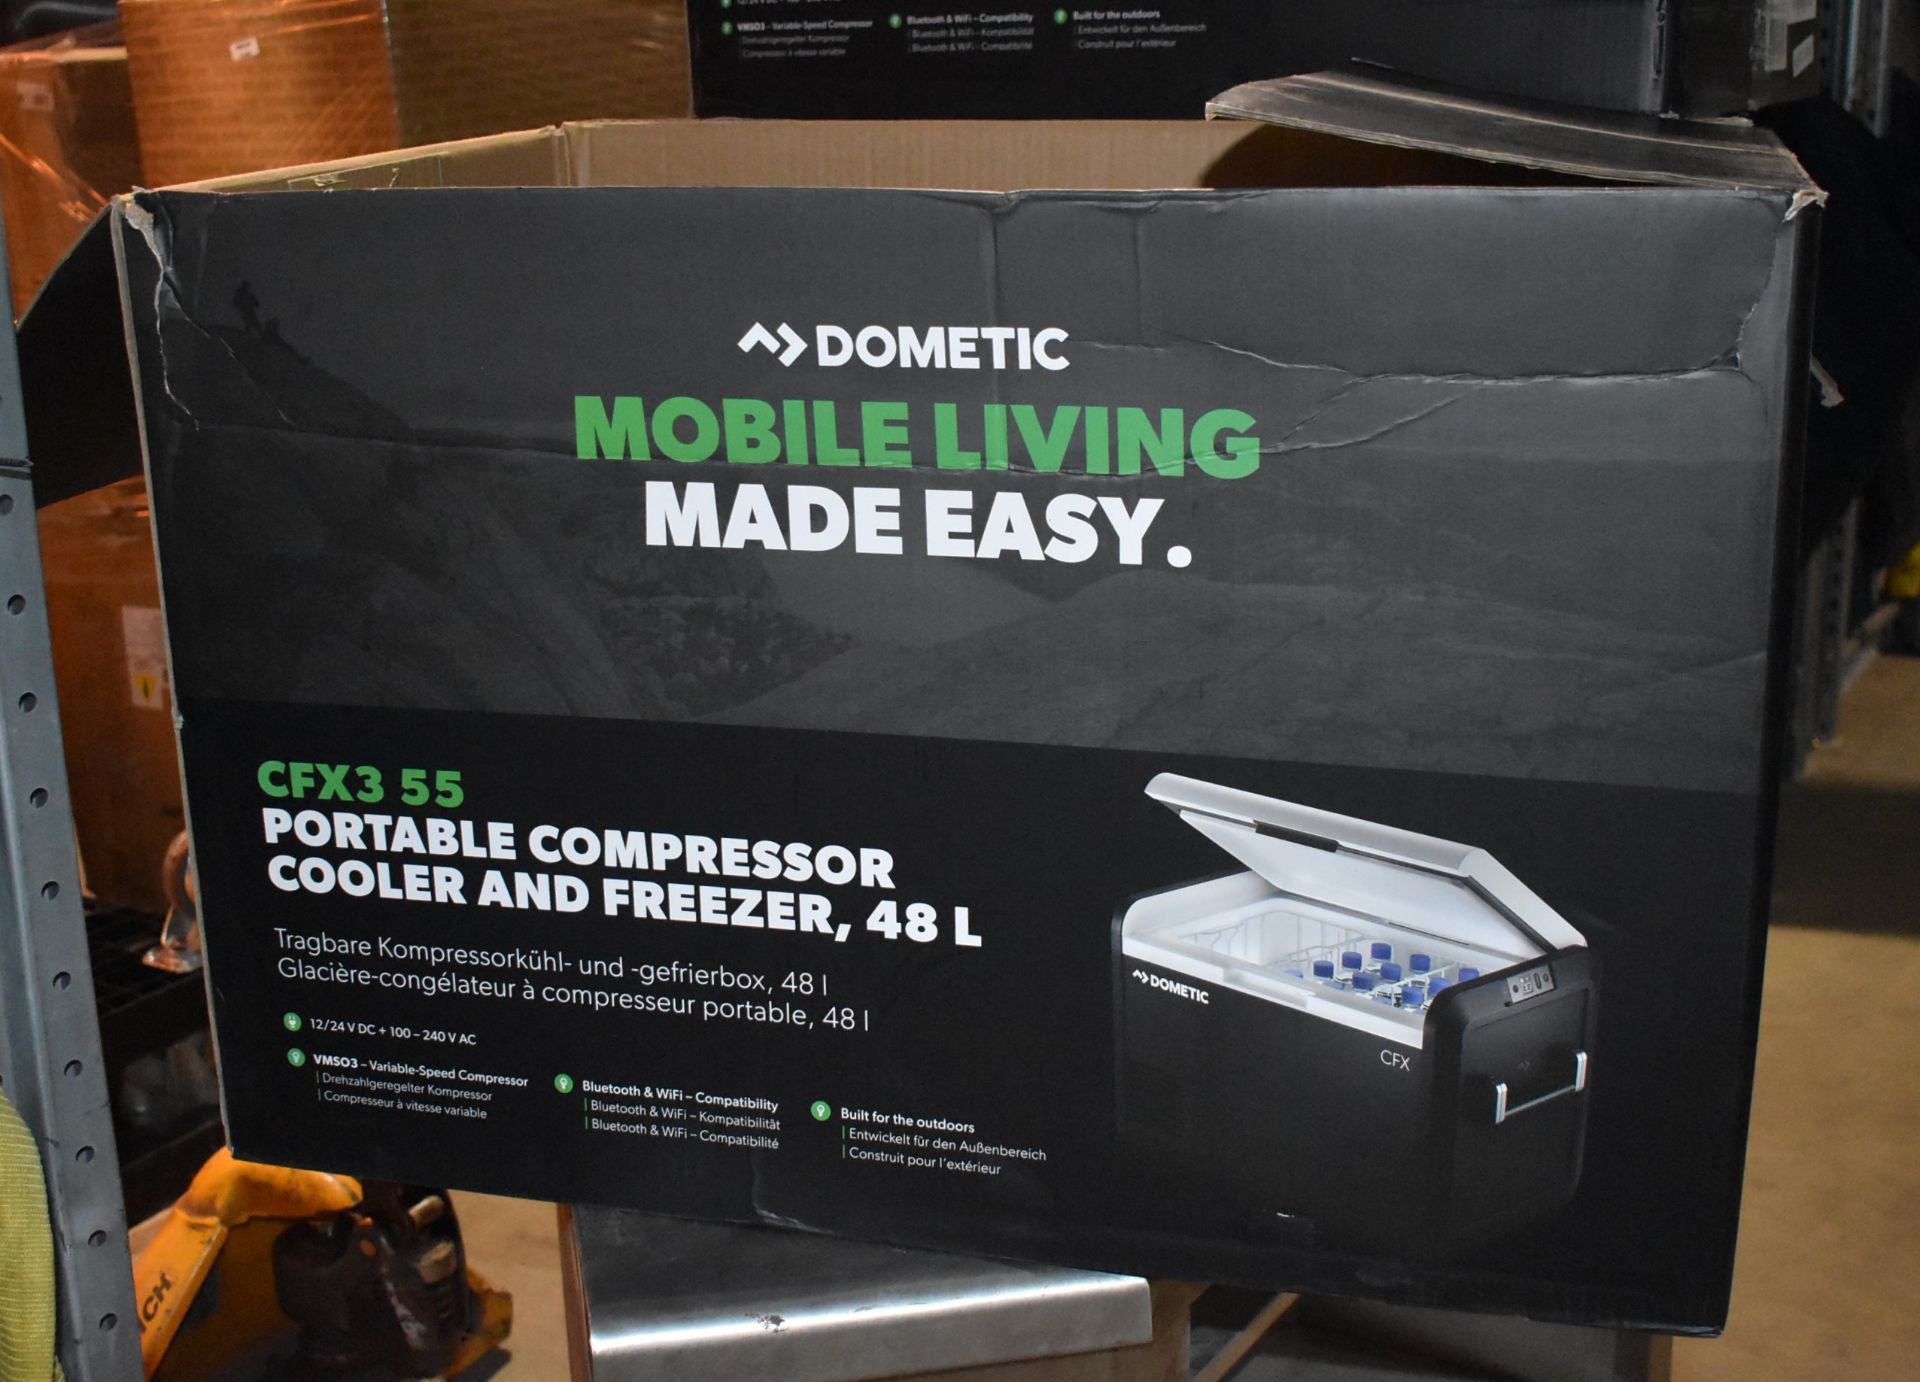 1 x Dometic CFX3 45 Portable 40l Compressor Cooler and Freezer - Features Bluetooth and WiFi - Image 5 of 10